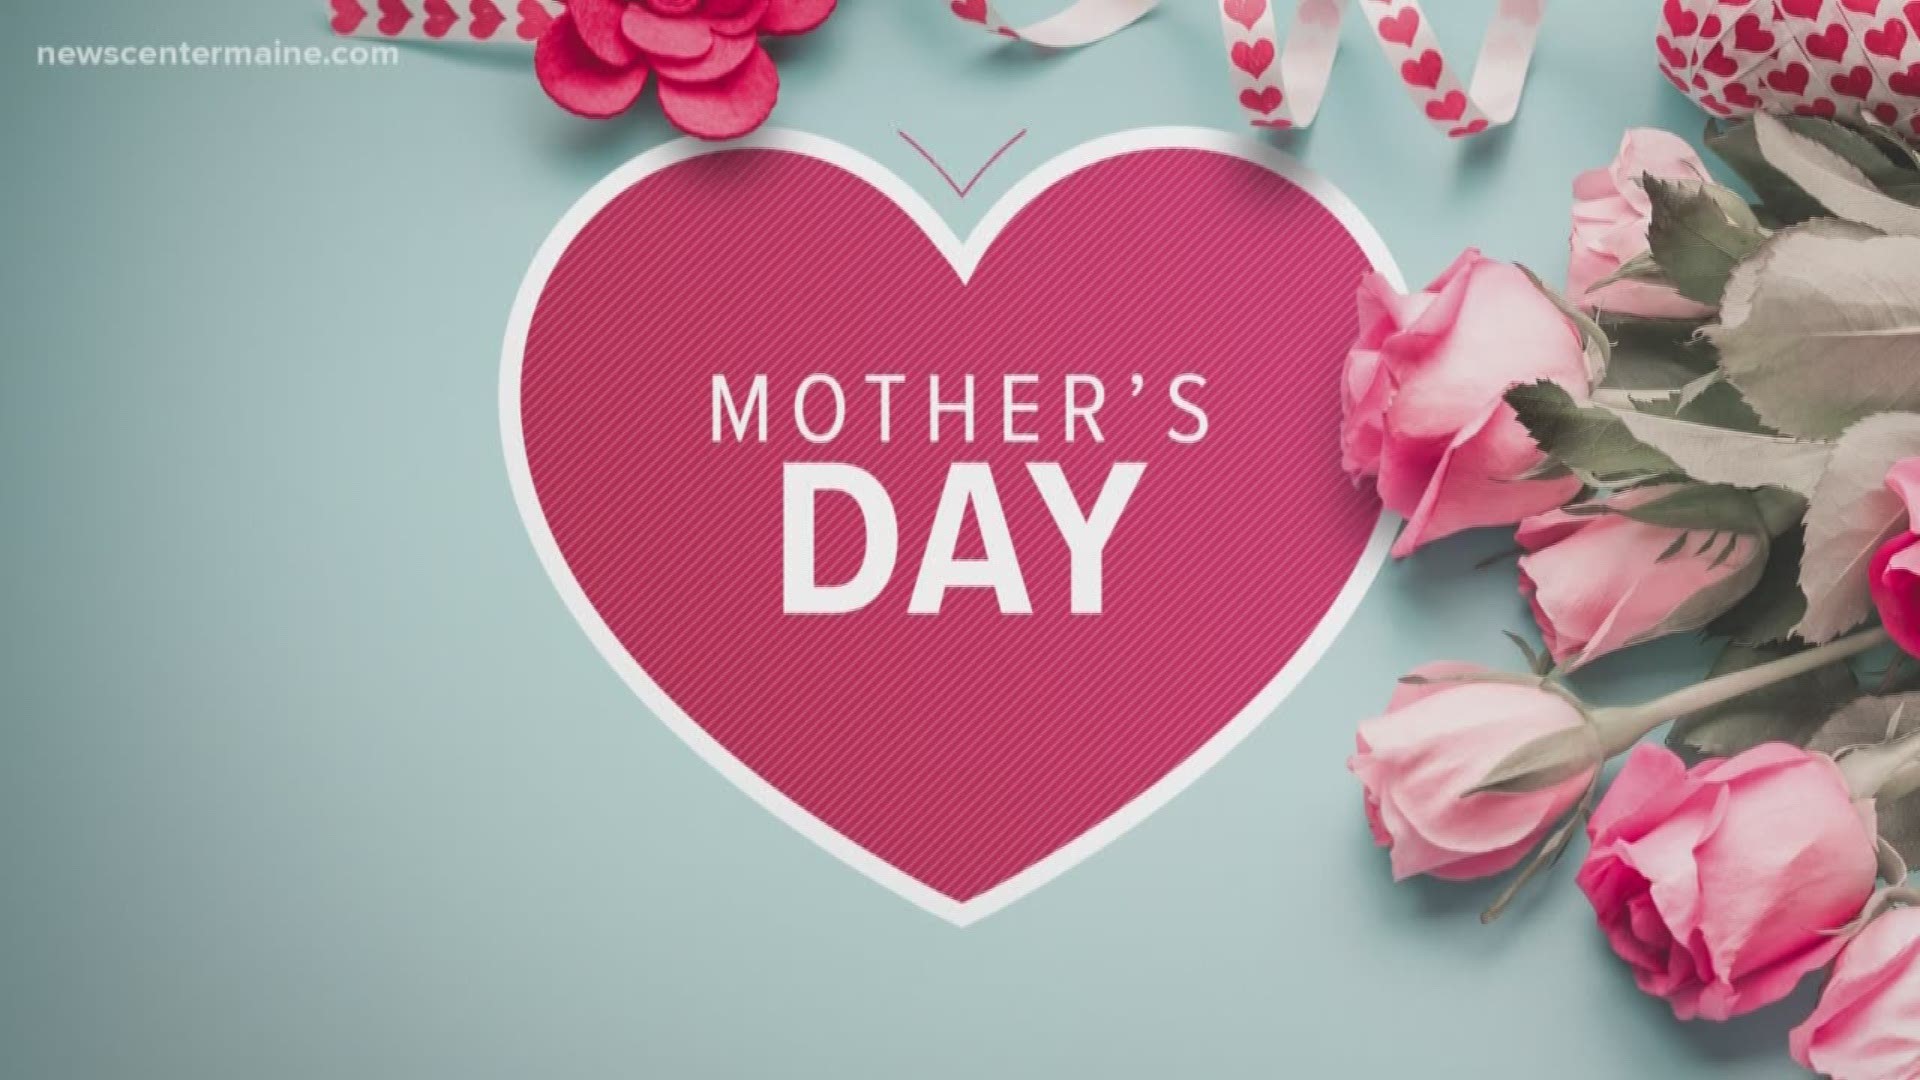 Happy Mother's Day from all of us at NEWS CENTER Maine.